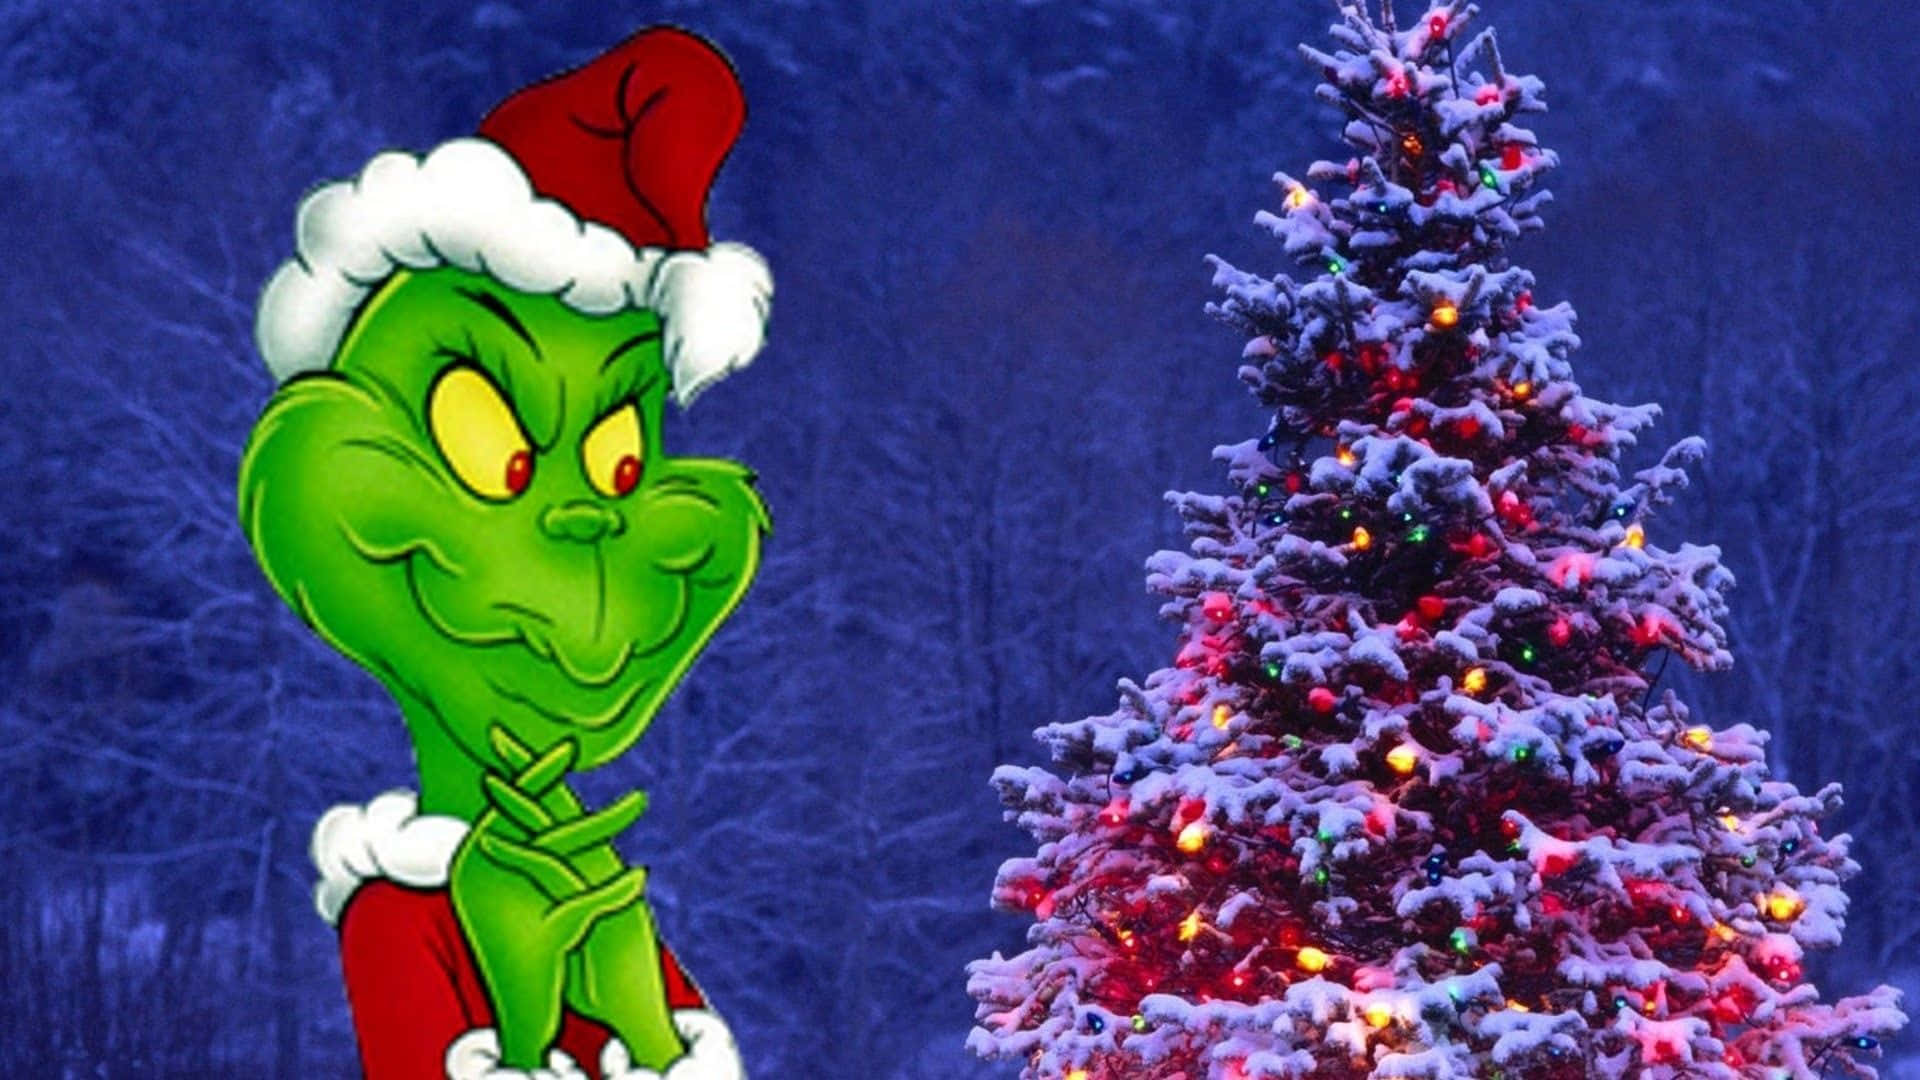 Have festive video calls this season with the Grinch Zoom Background!